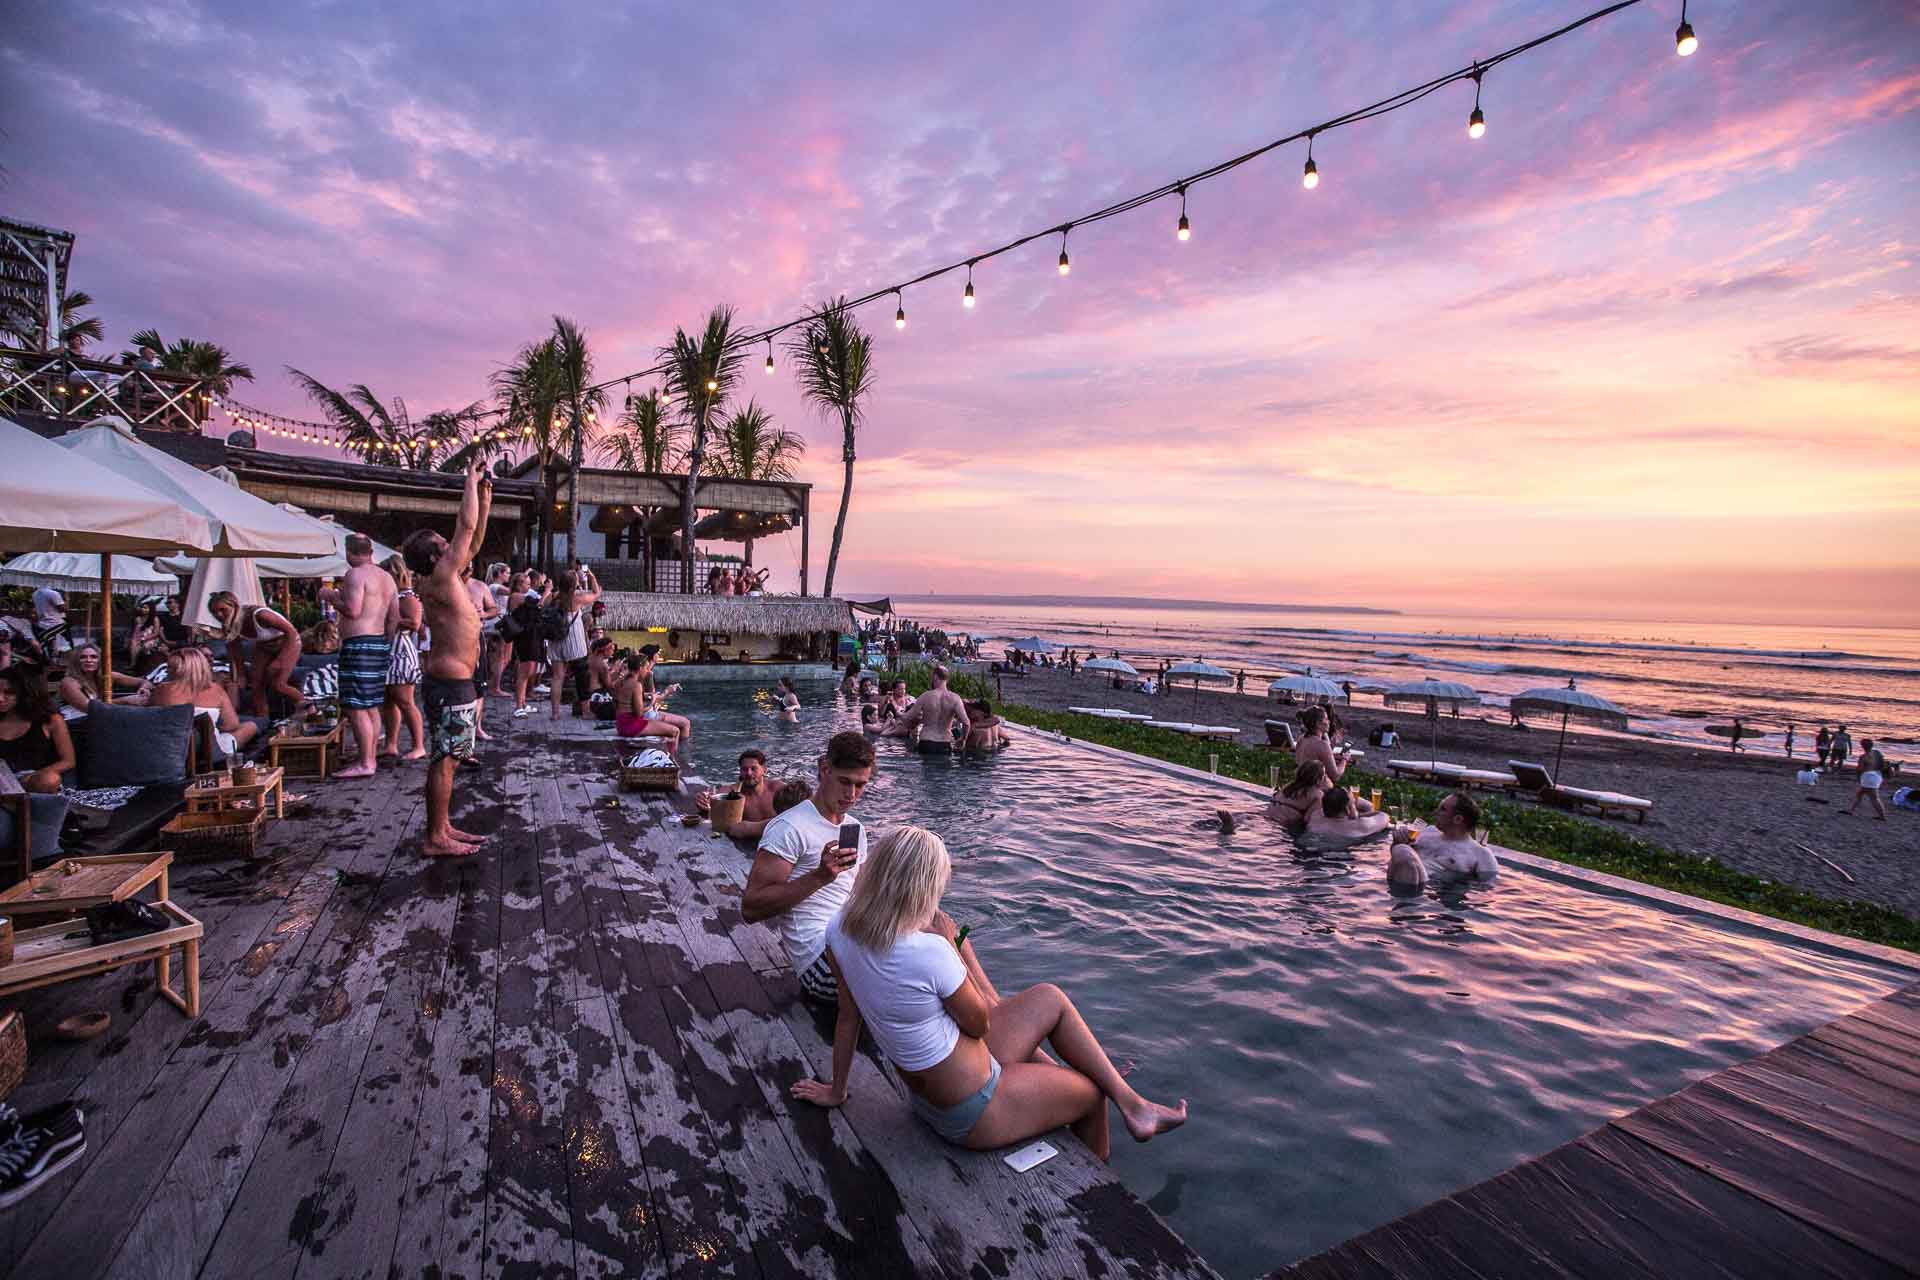 where to stay in canggu, best area to stay in canggu, best place to stay in canggu, best places to stay in canggu, canggu where to stay